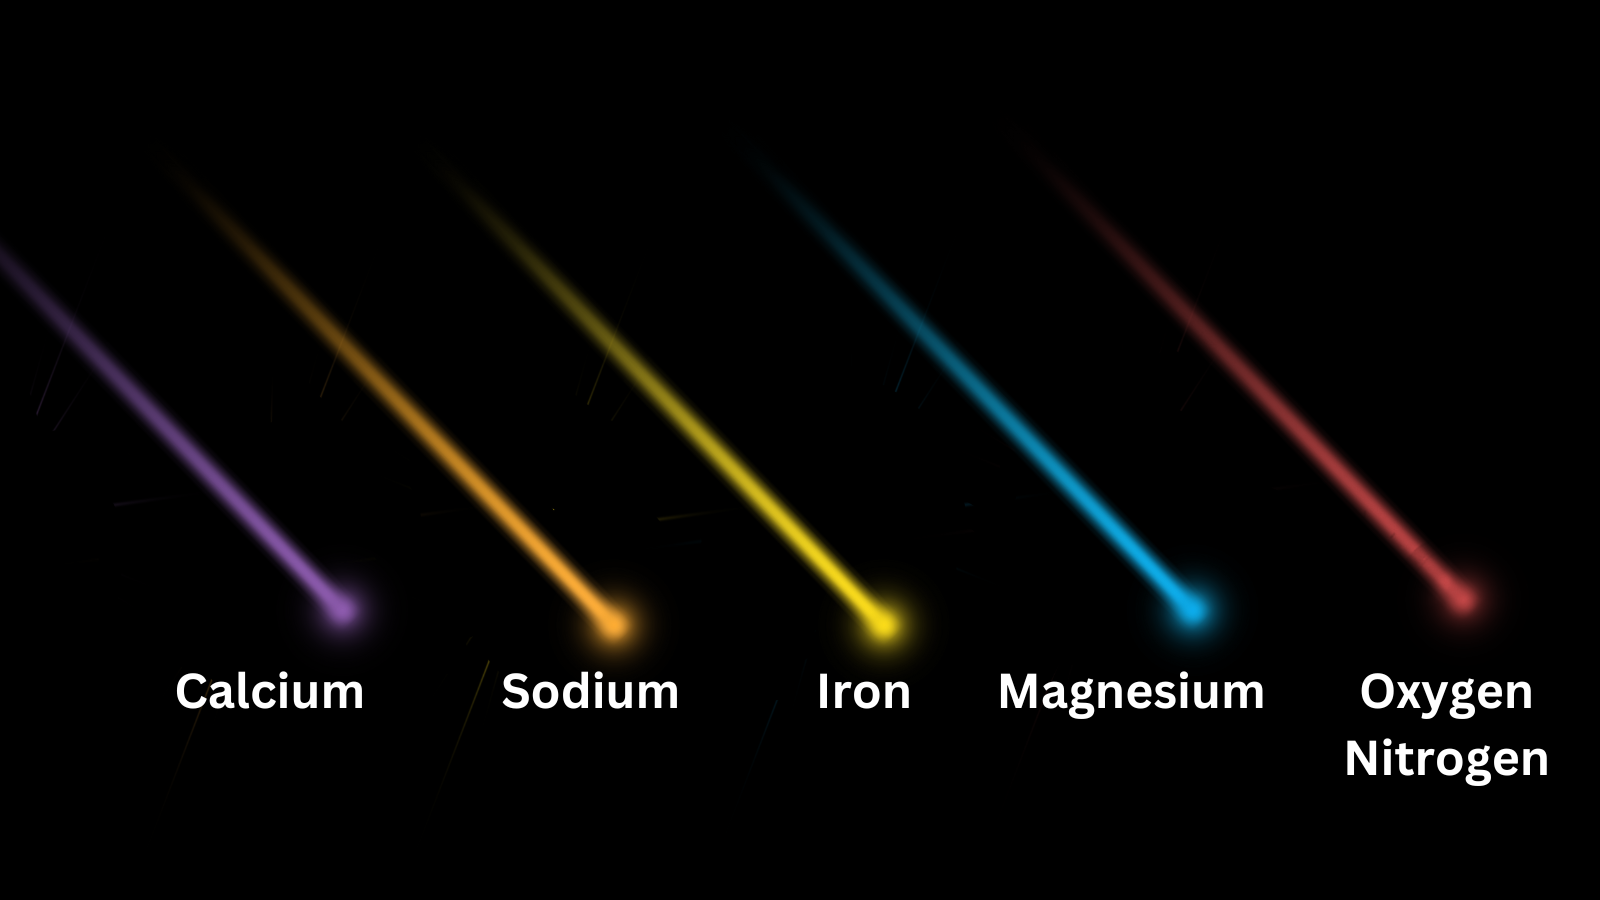 An illustration showing the different colors of fireballs and the chemical that they indicate